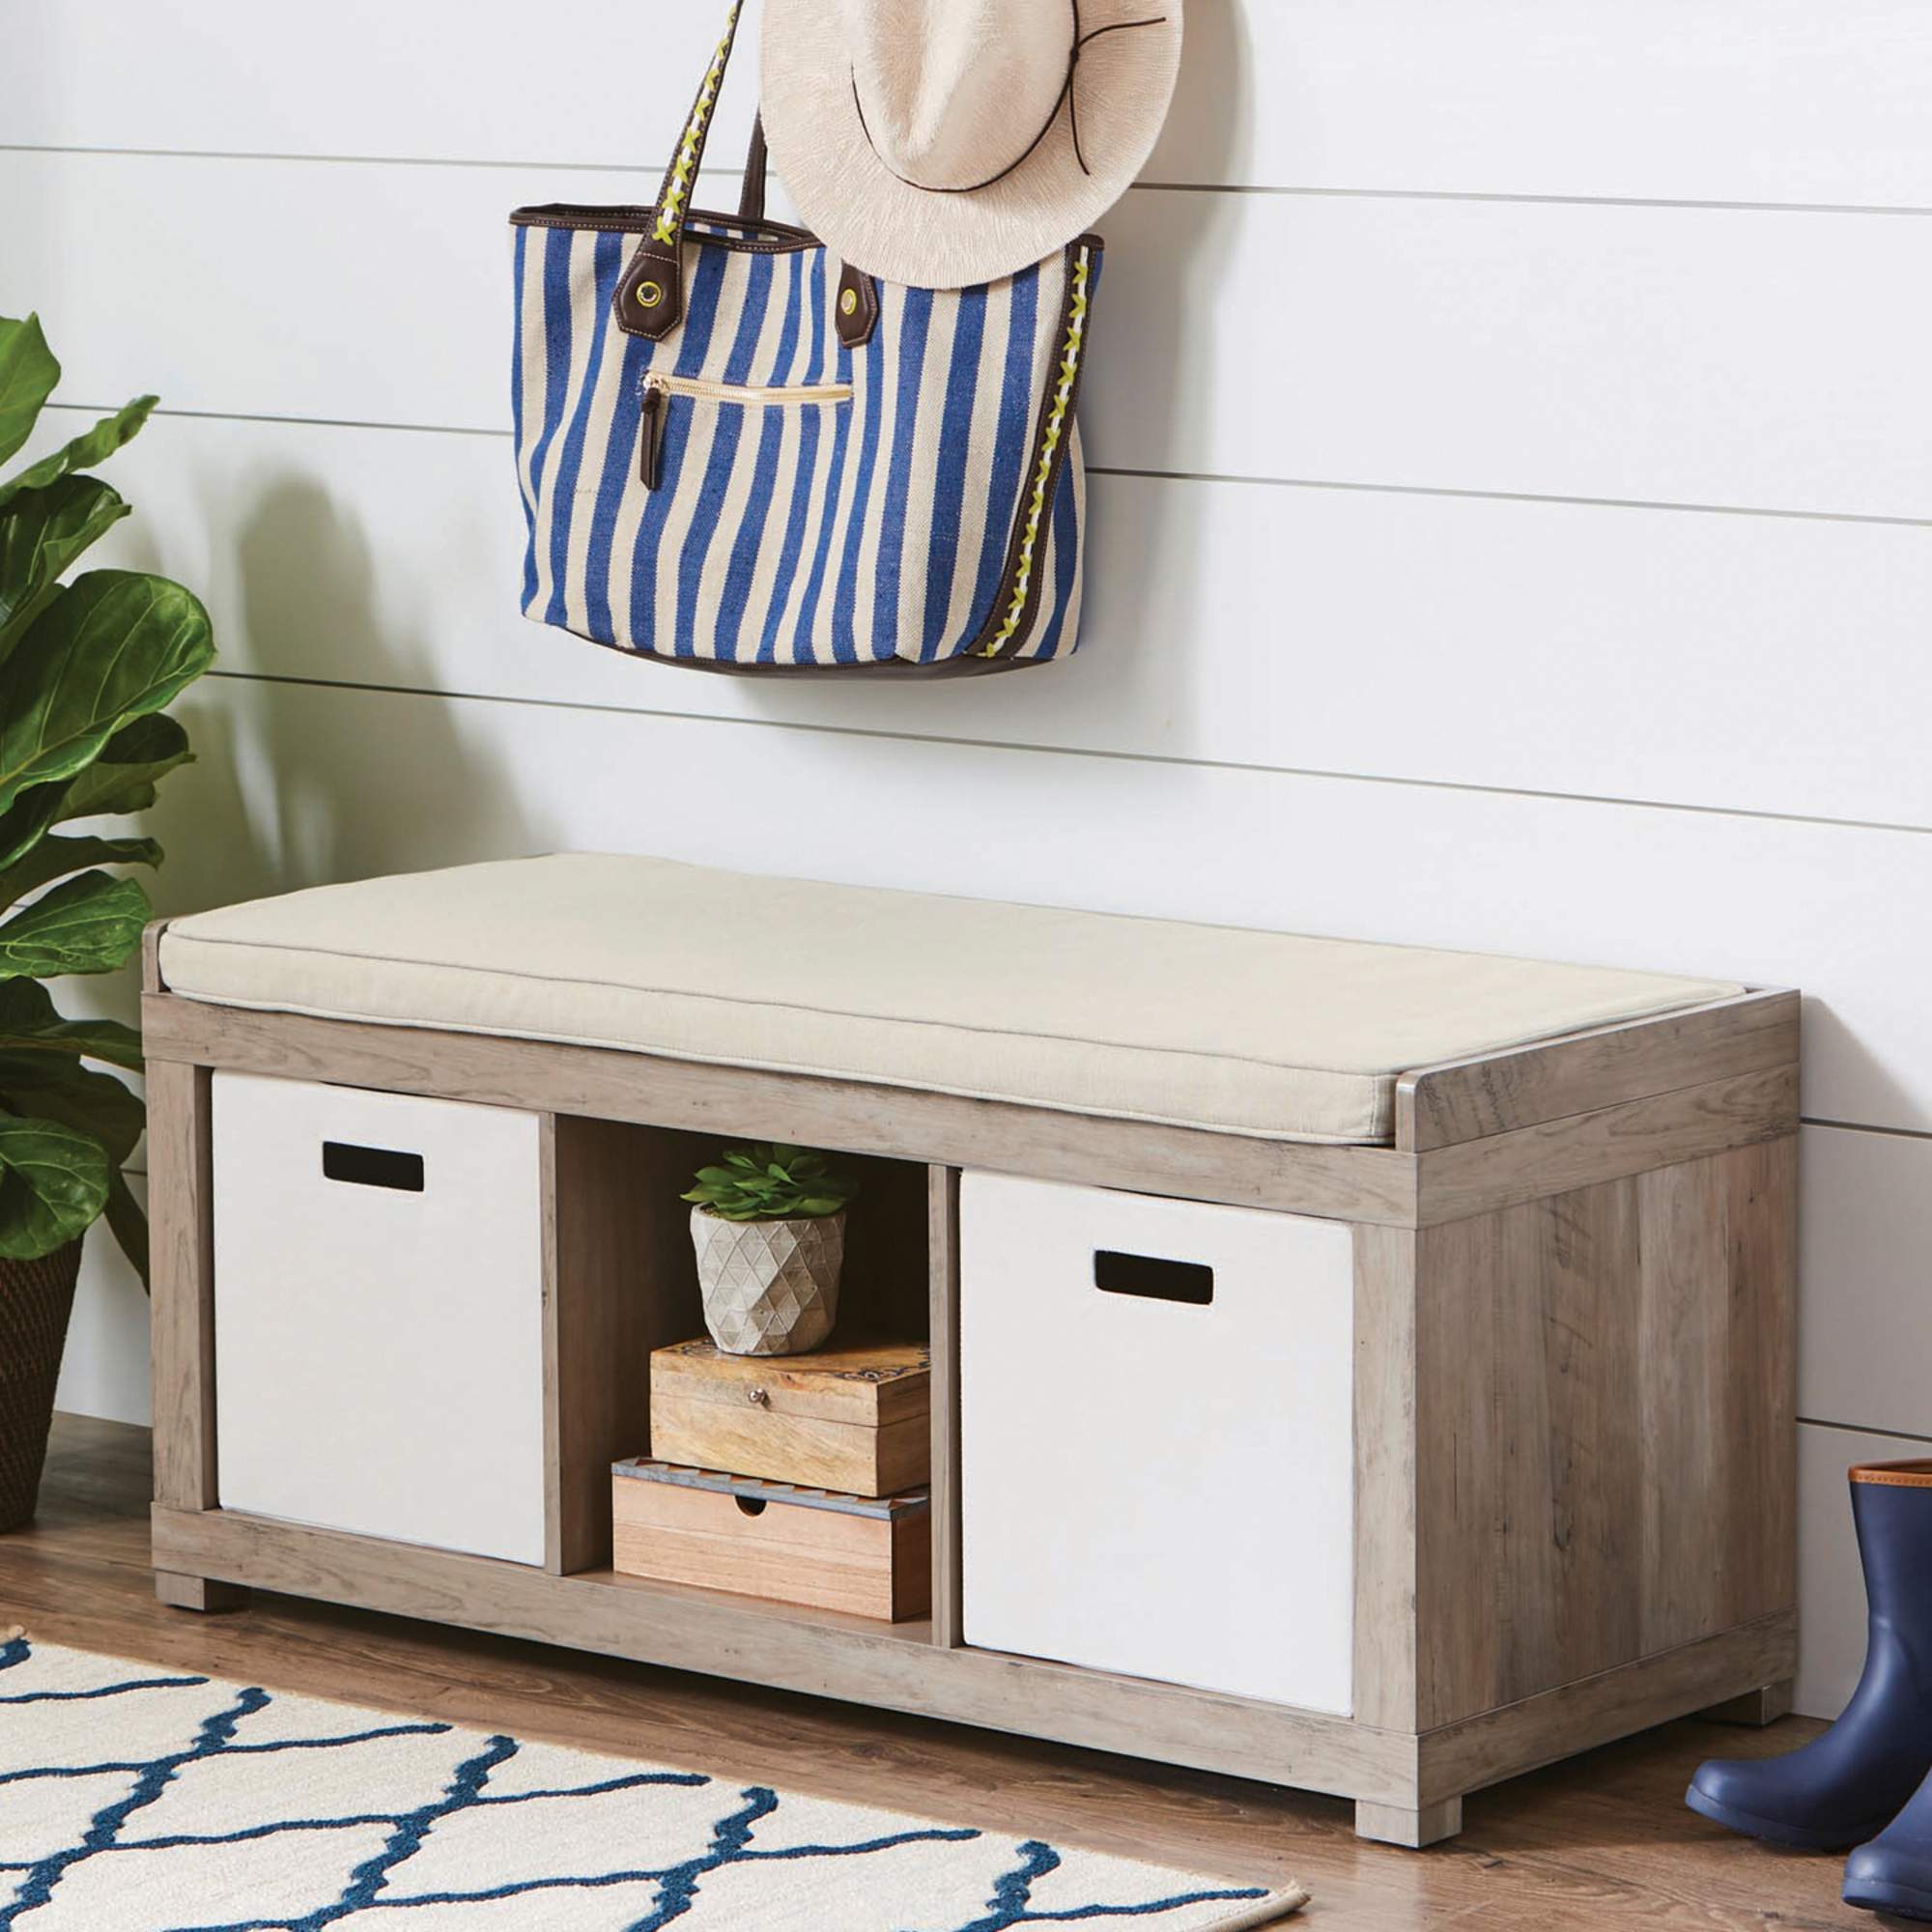 Better Homes & Gardens 3-Cube Shoe Storage Bench, Rustic Gray - image 1 of 9